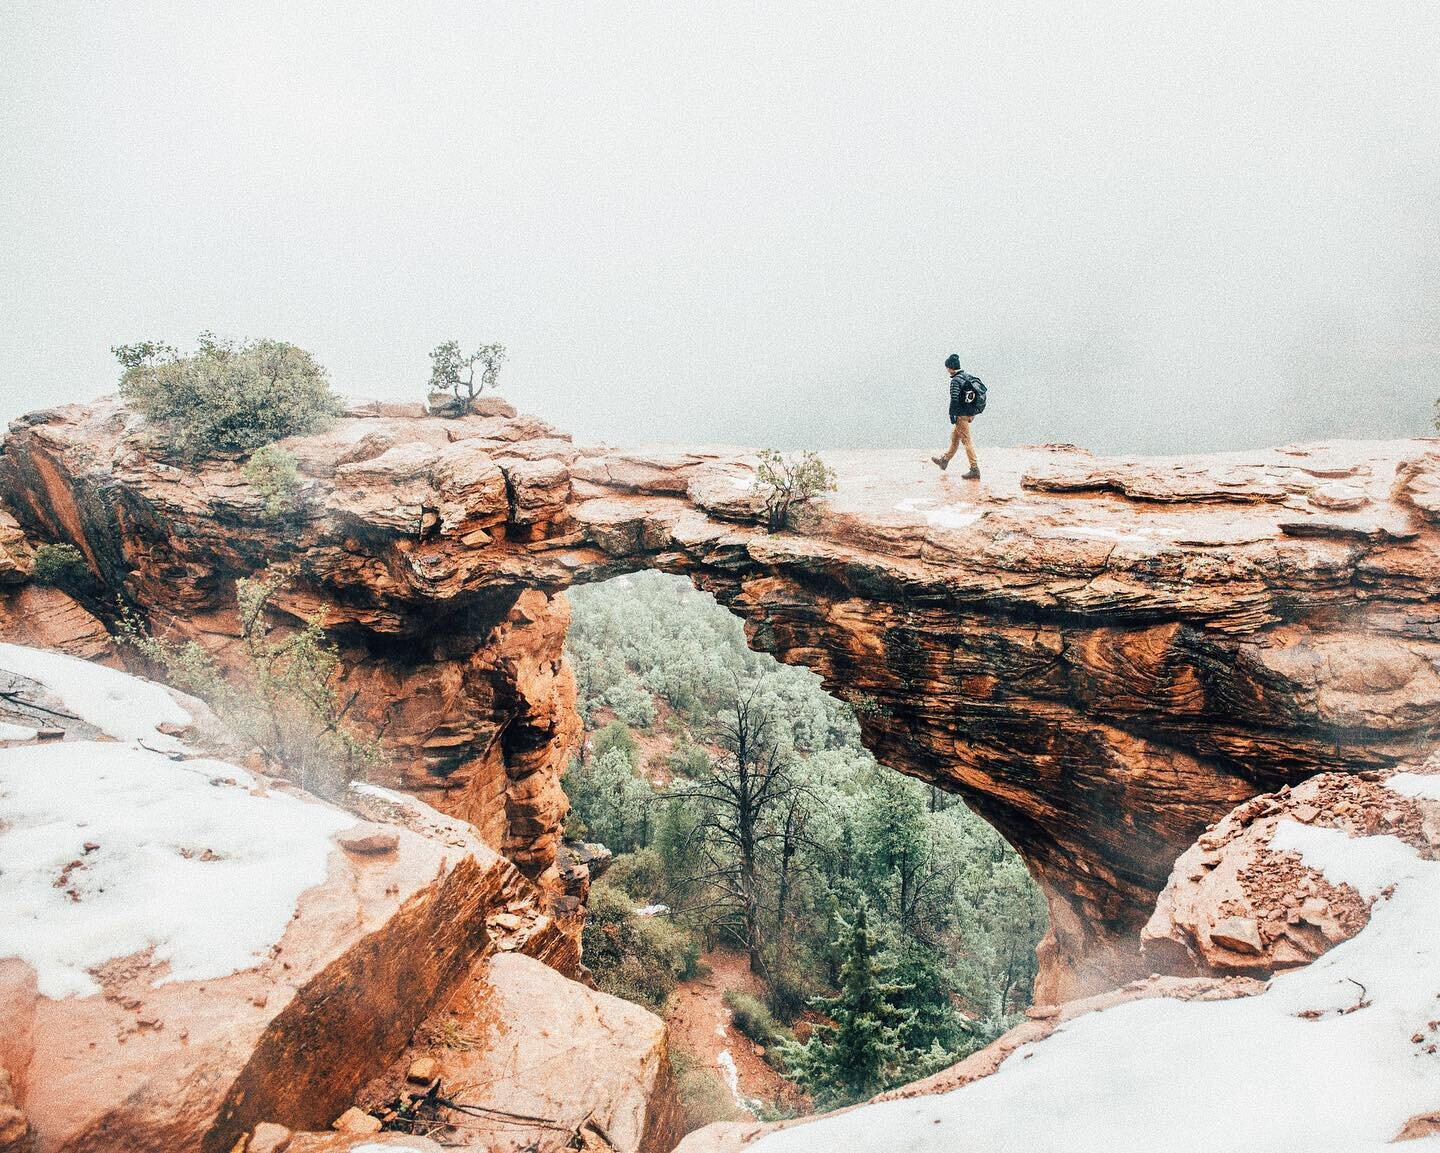 Throwing it back to that time Marlyn and I hiked up to Devil&rsquo;s Bridge in Sedona, AZ. It was snowing and raining all day&mdash; what started as a muddy and slippery hike, ended with a wonderful view and the bridge all to ourselves. Can you find 